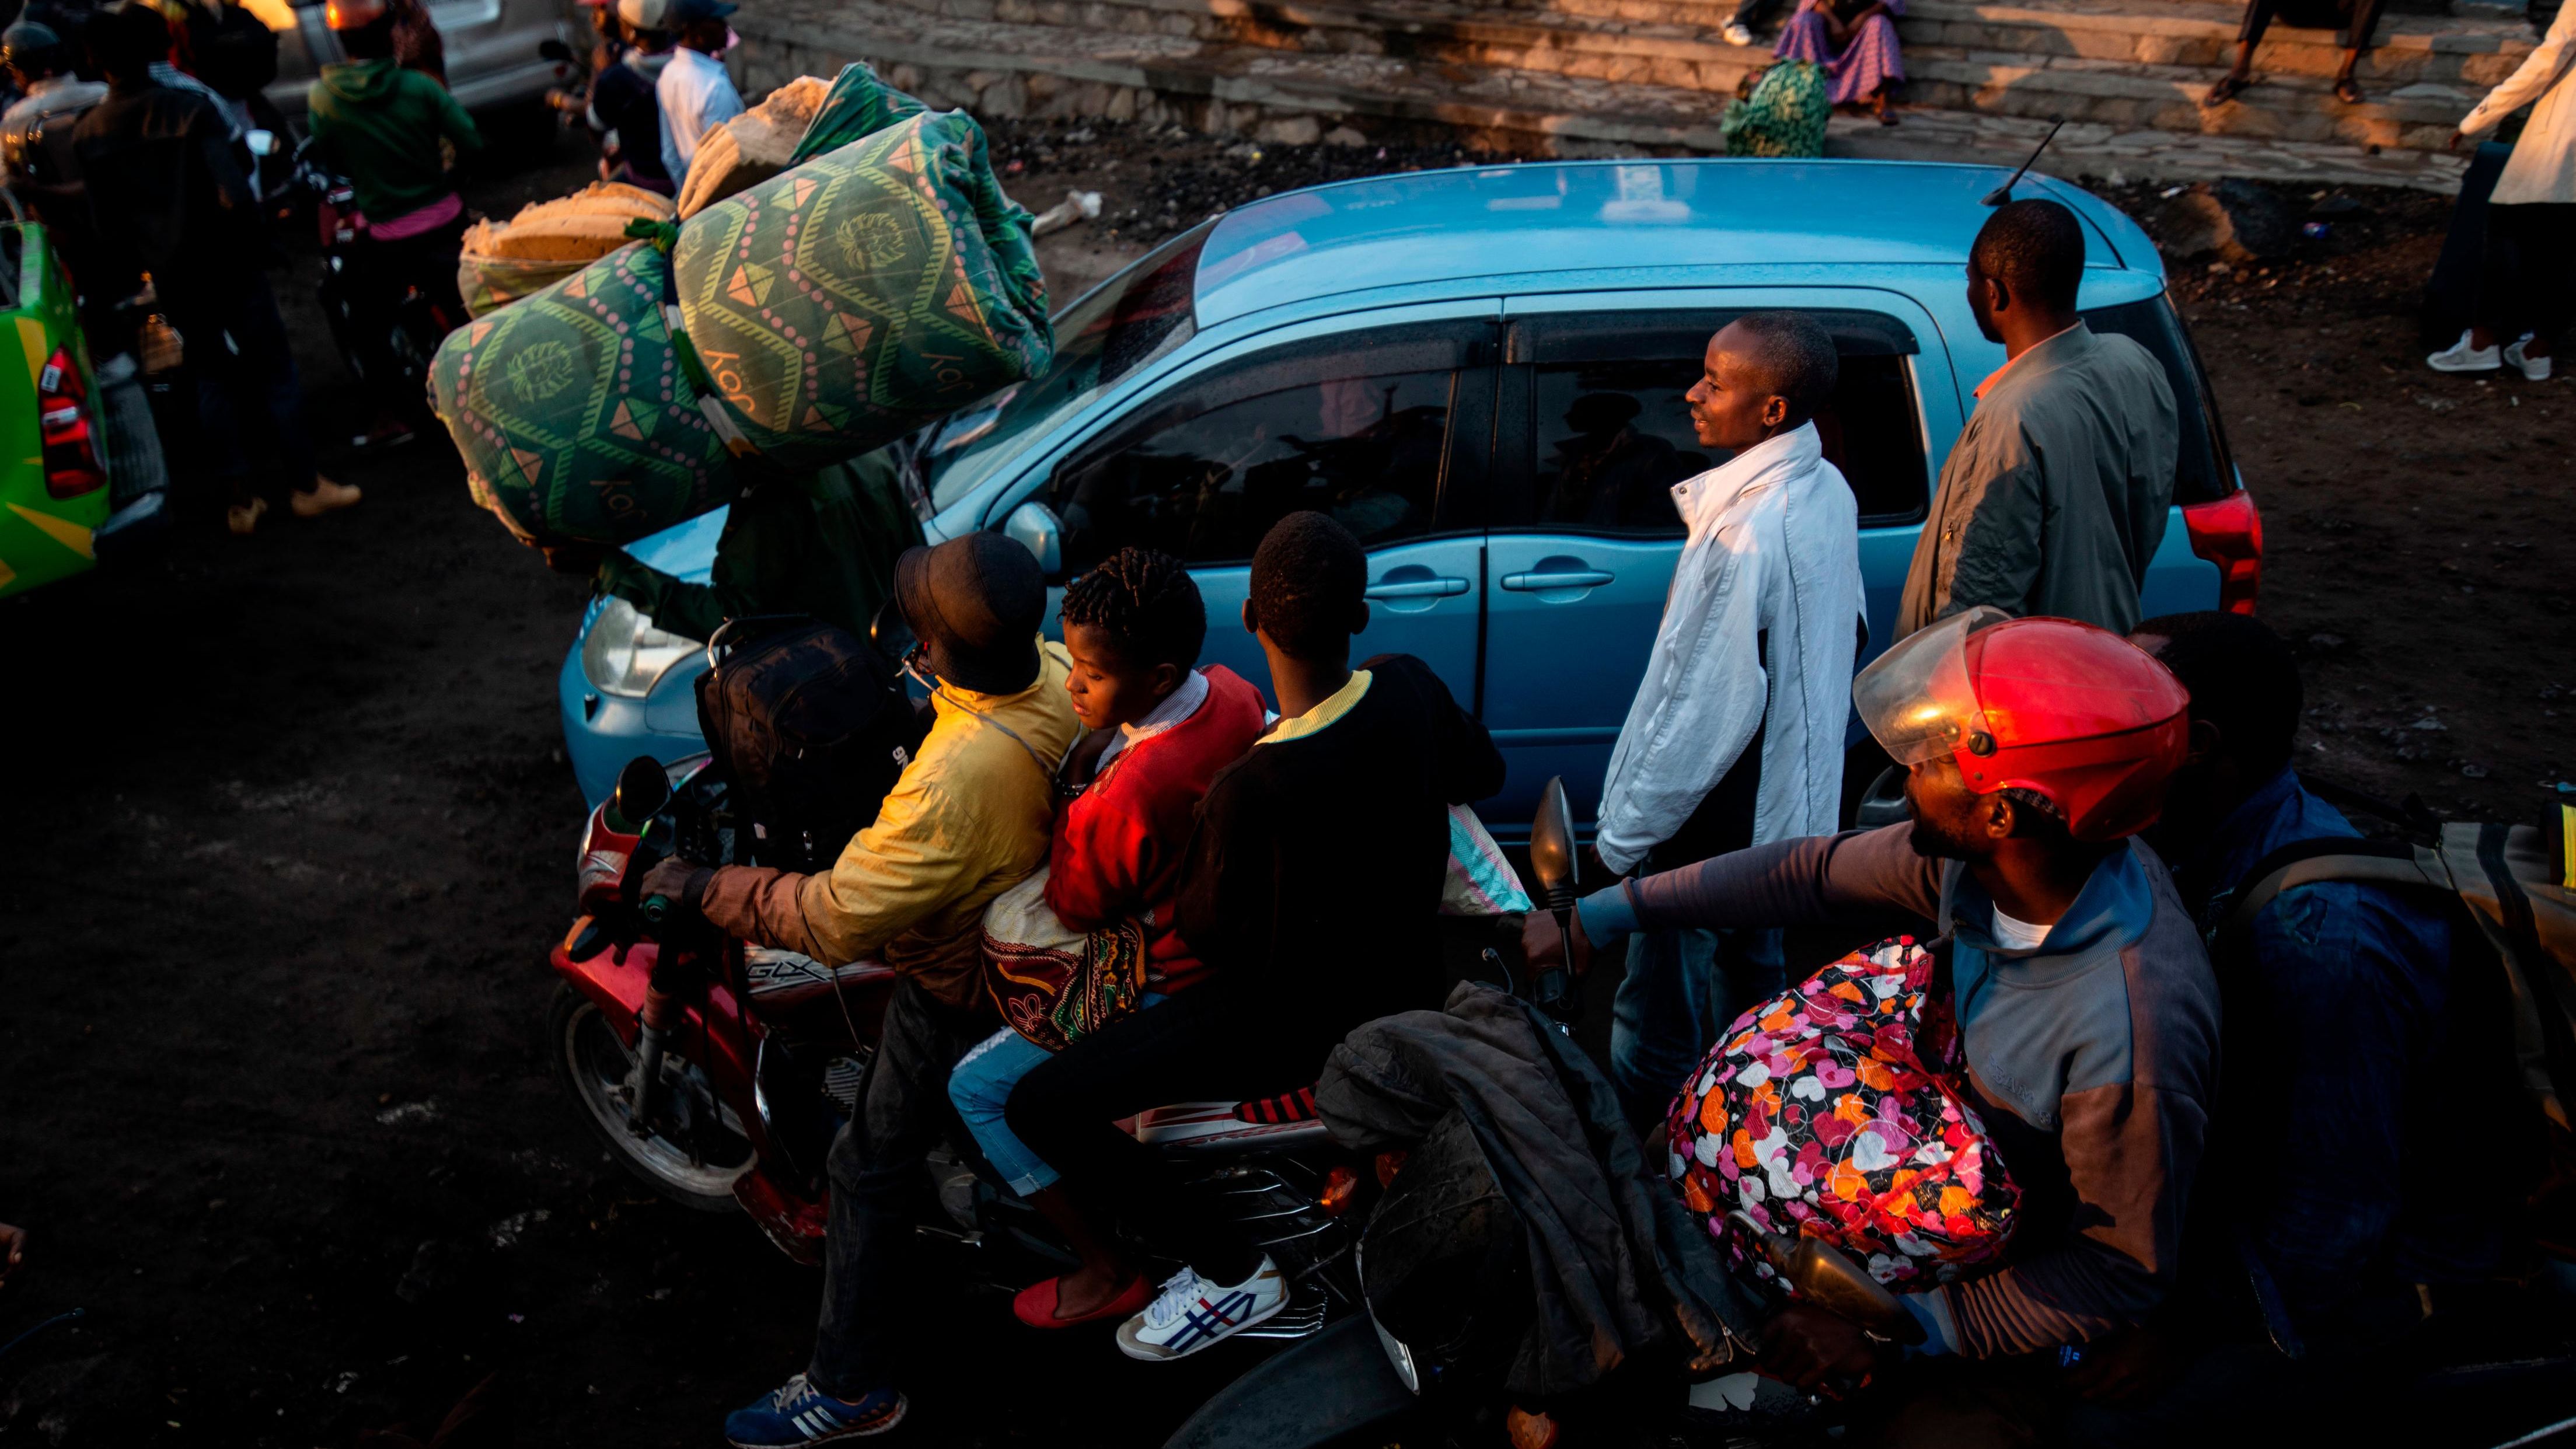 Residents flee Goma on Thursday, May 27, after an evacuation order was issued.